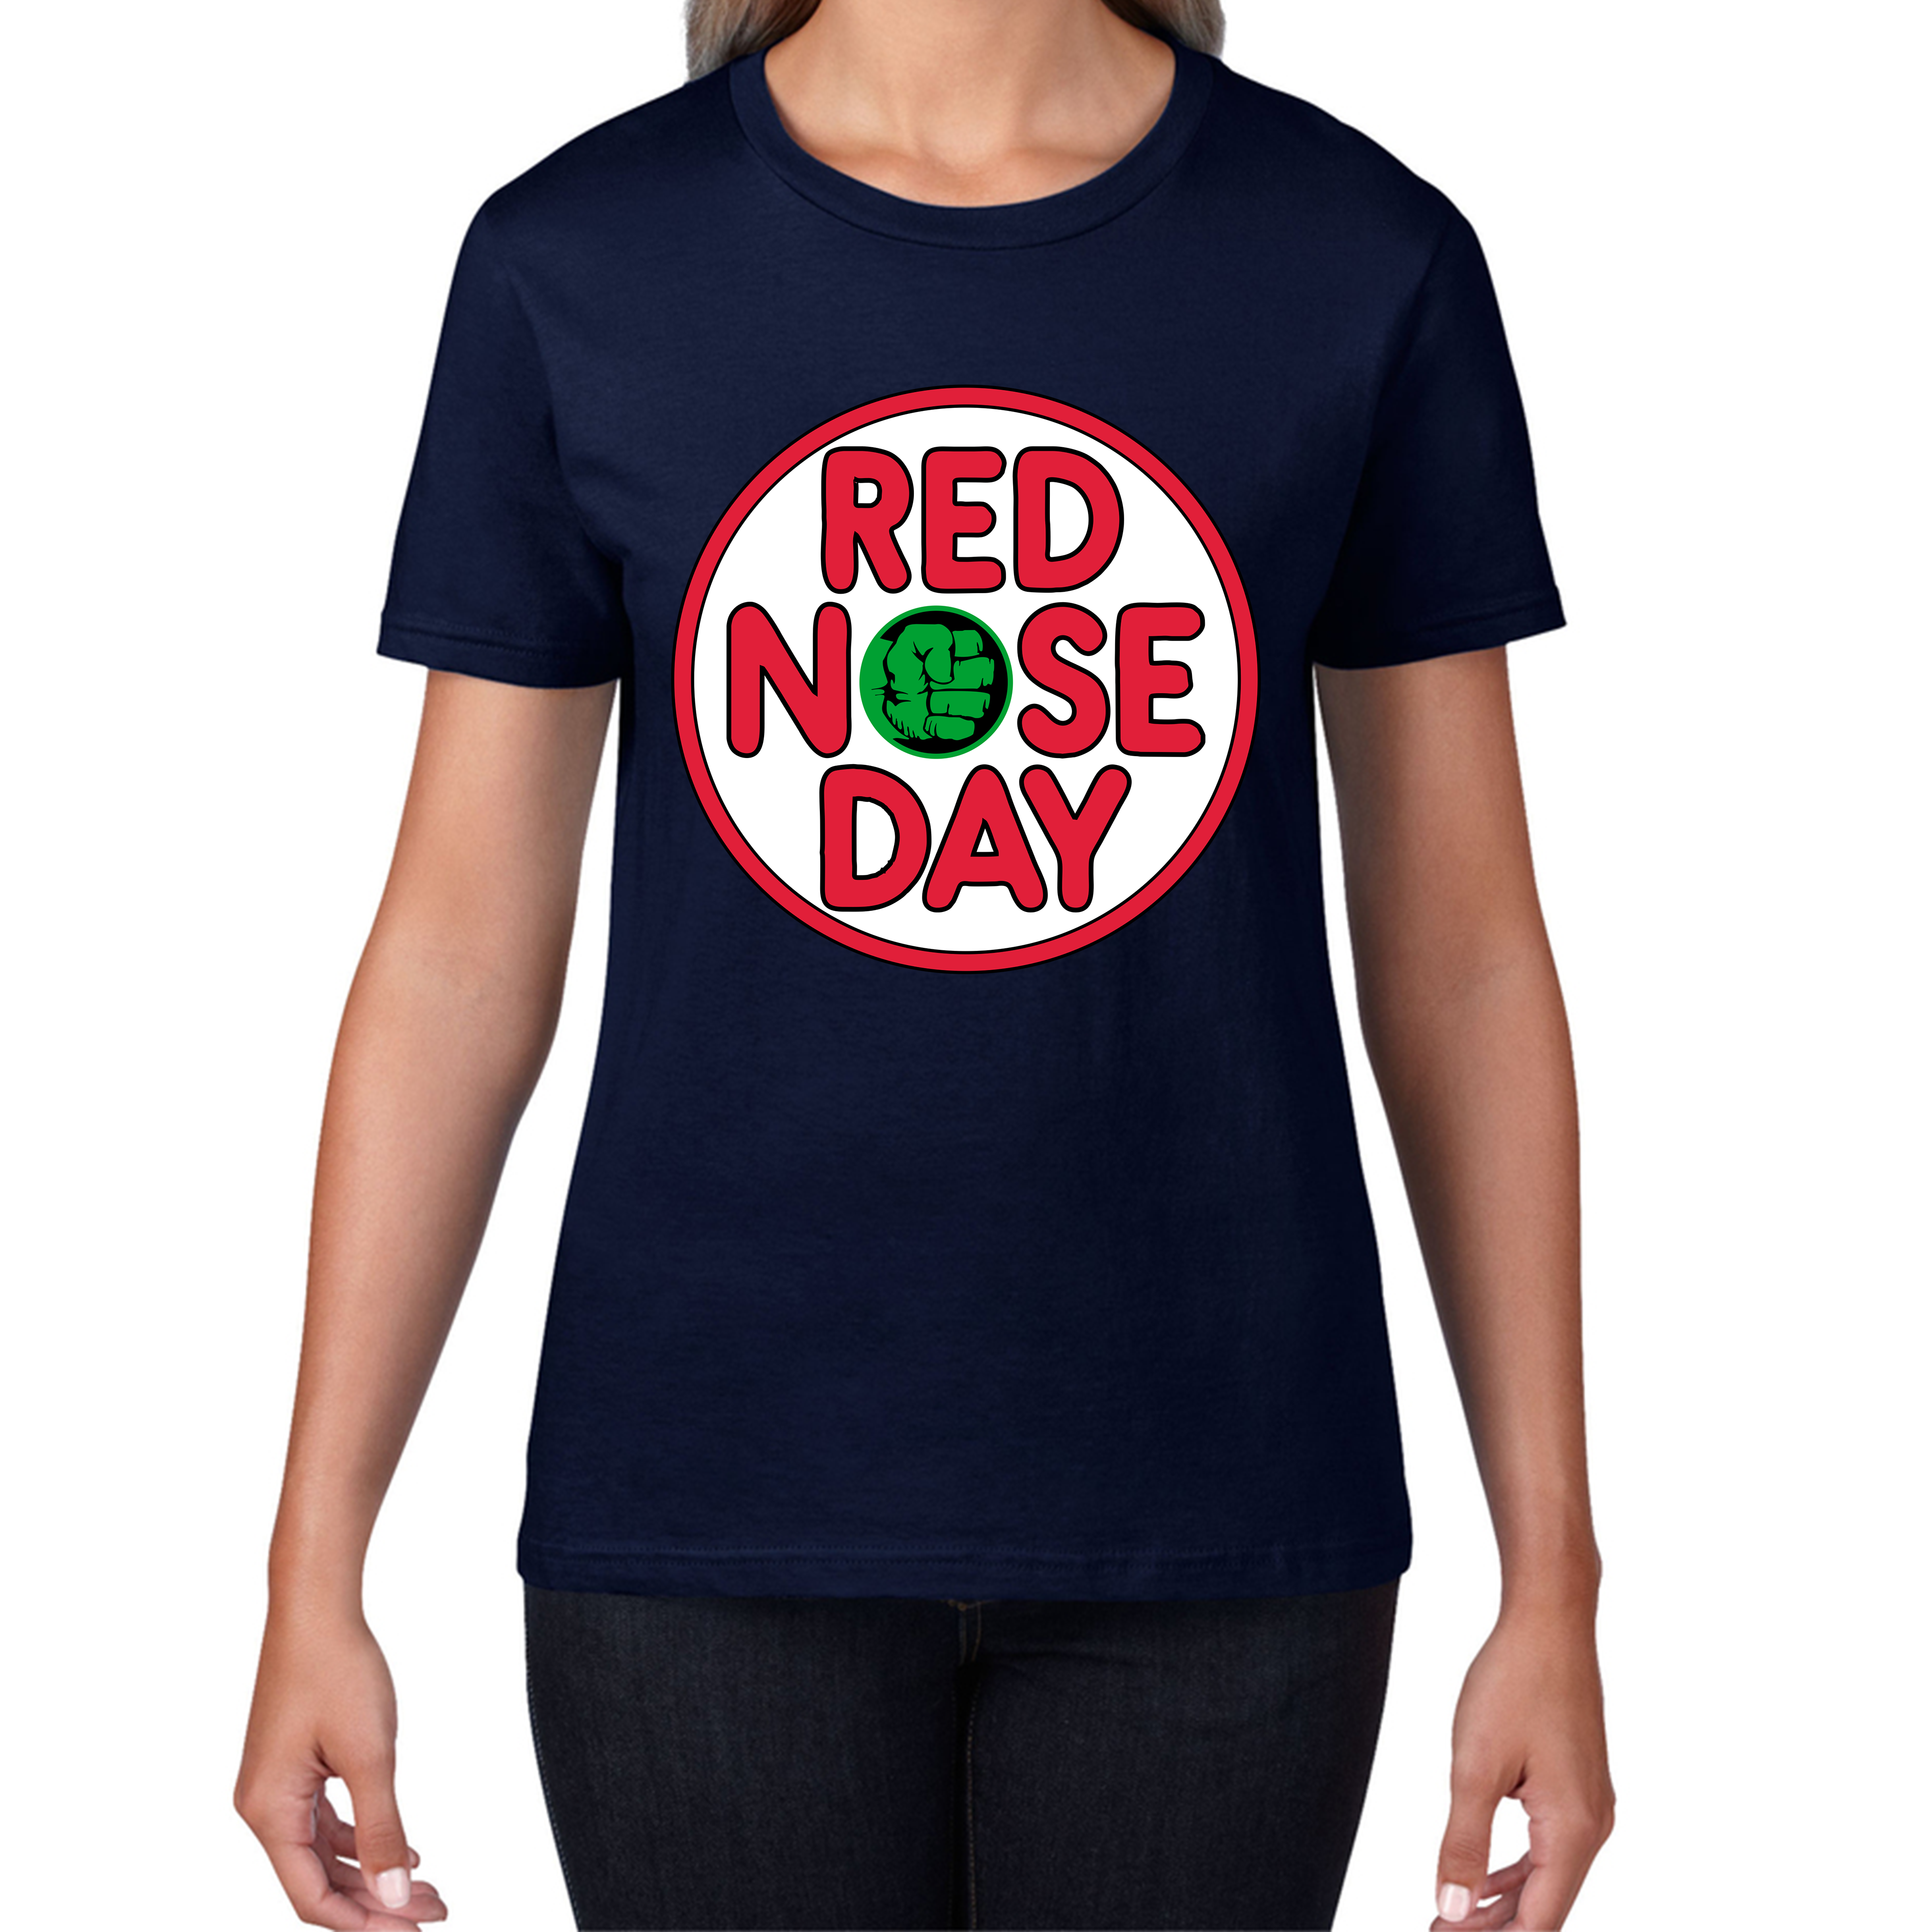 Marvel Avengers Hulk Hand Red Nose Day Ladies T Shirt. 50% Goes To Charity